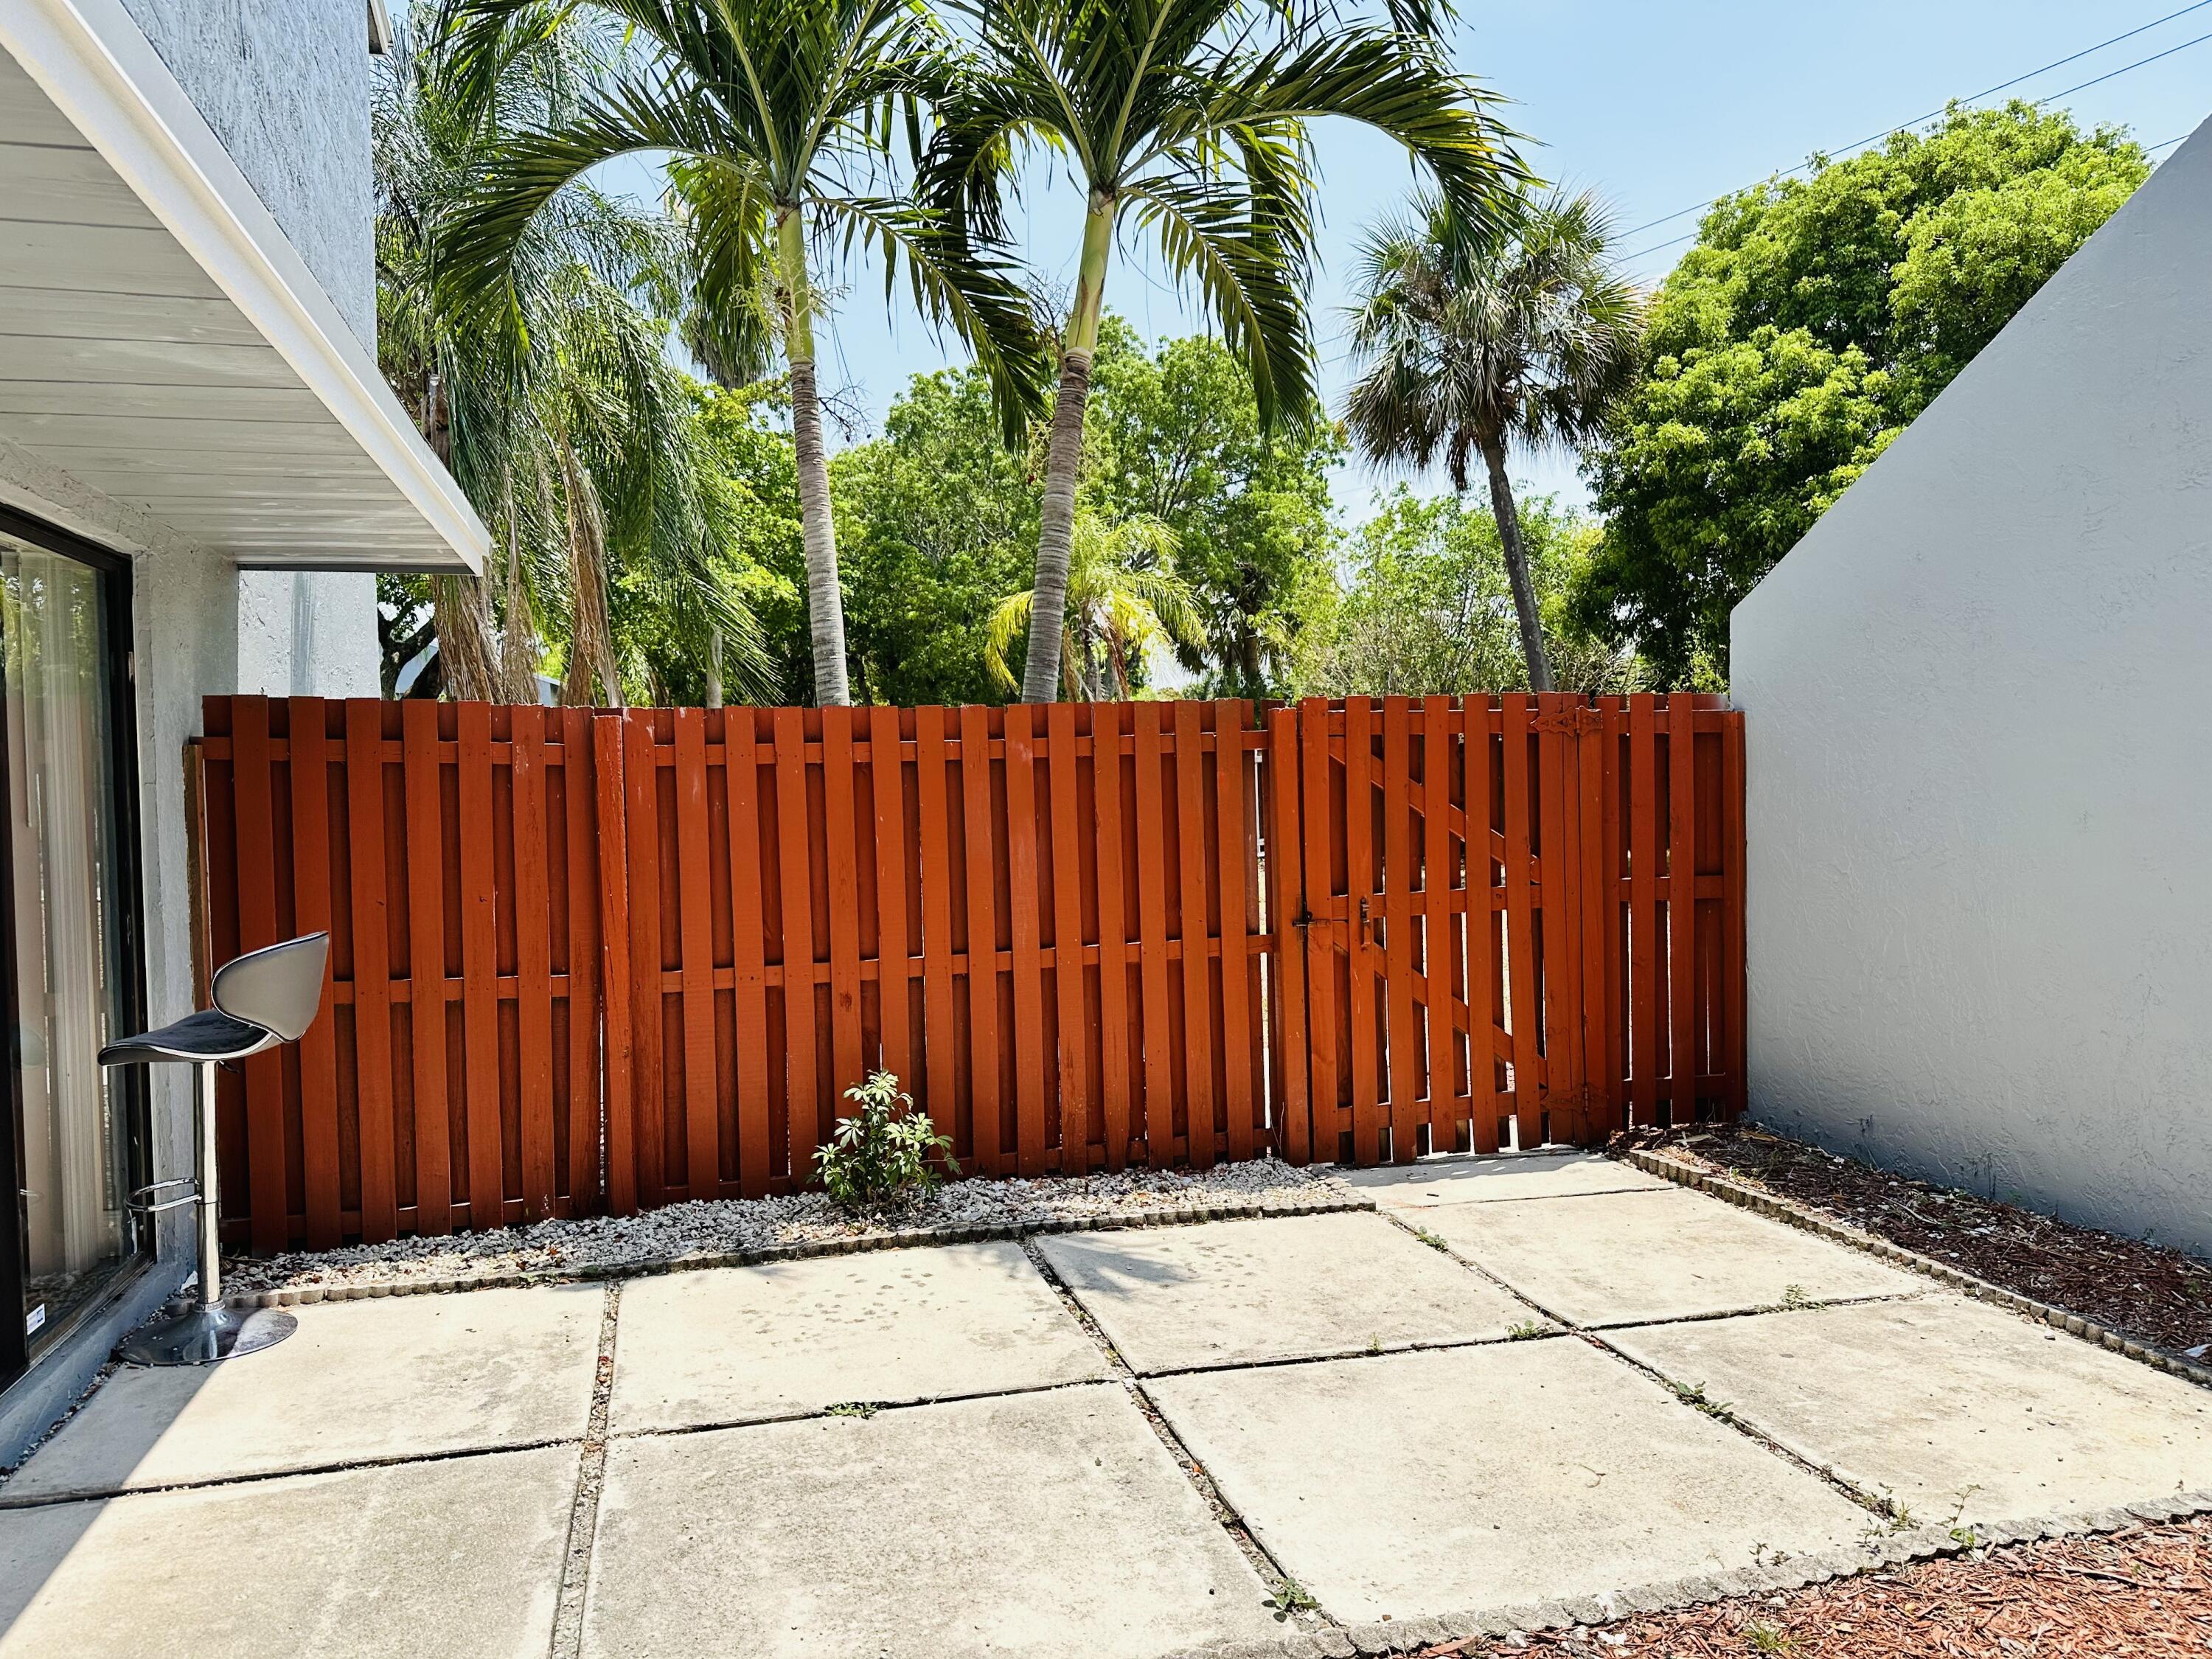 a view of outdoor space with backyard